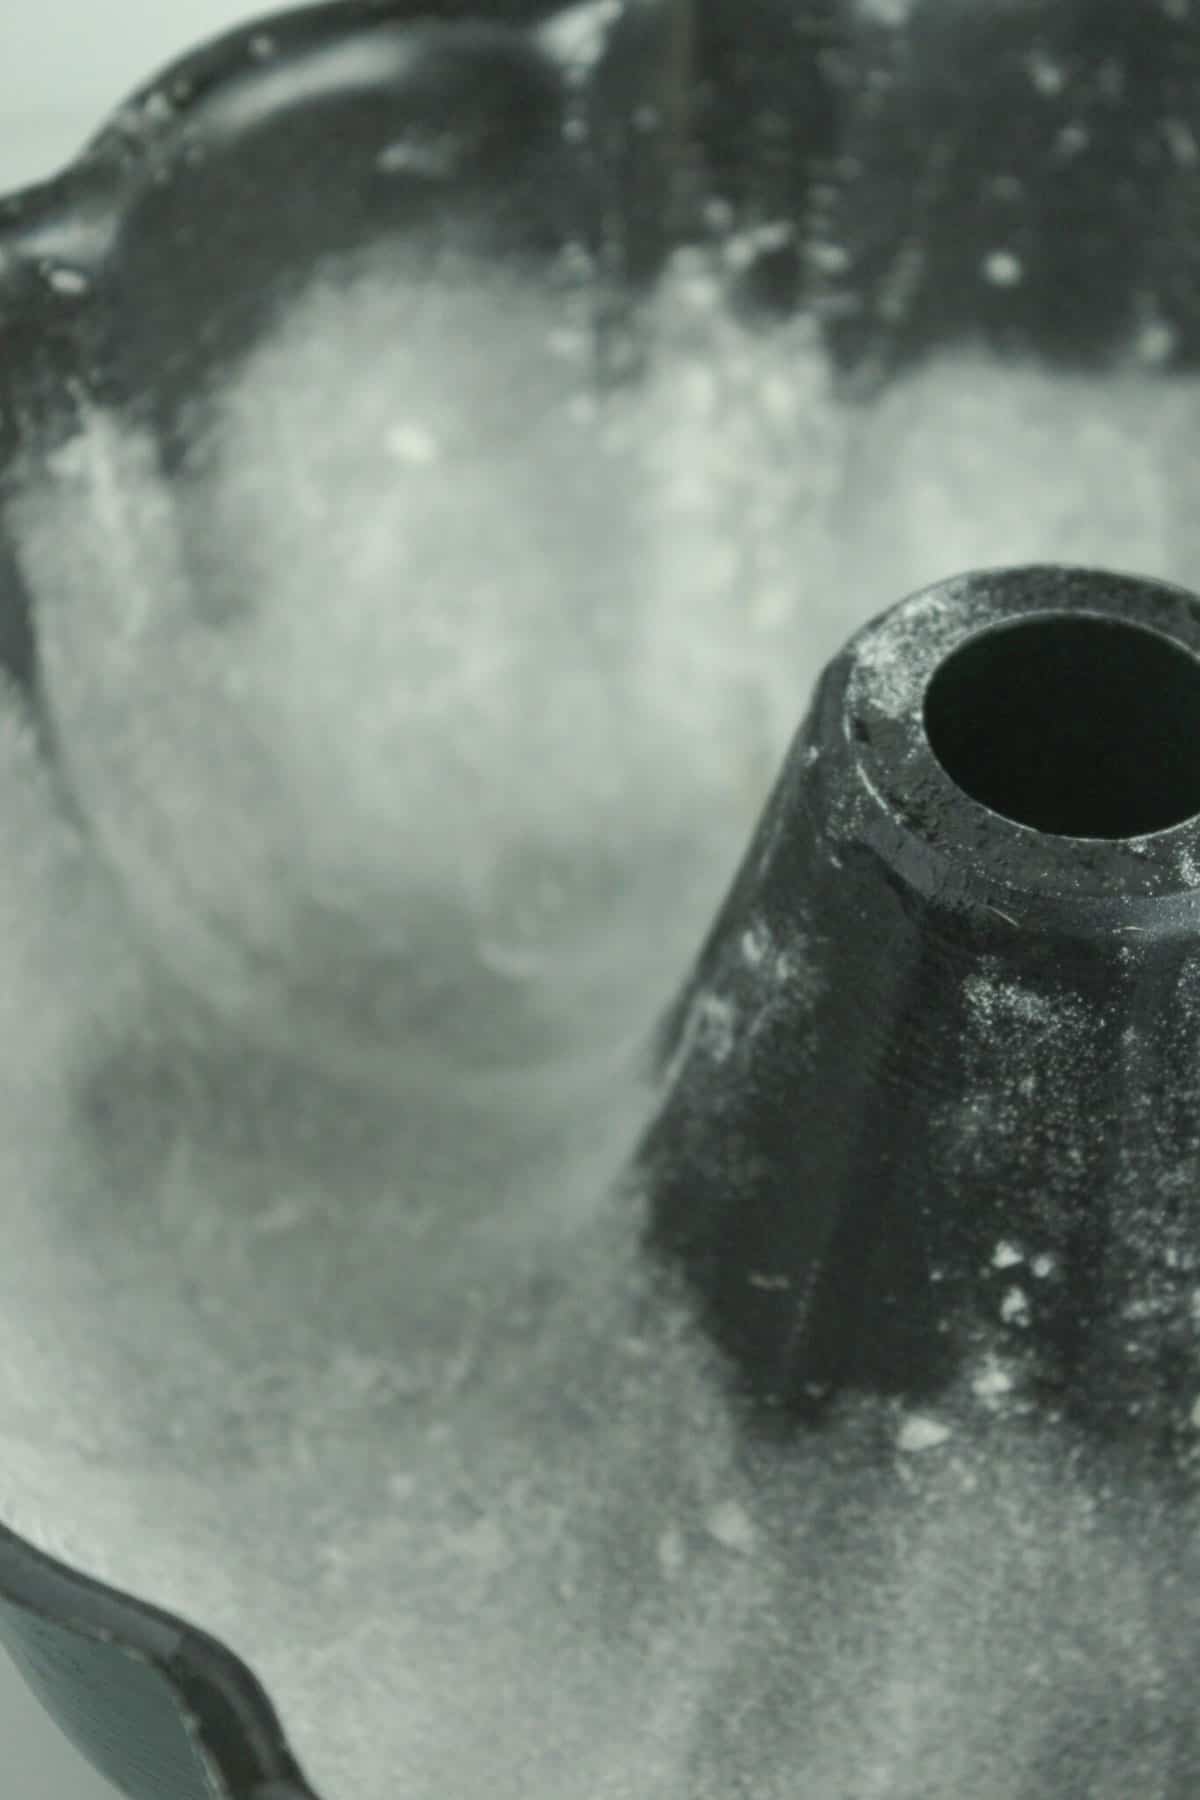 A bundt pan sprayed with nonstick spray and dusted with flour.